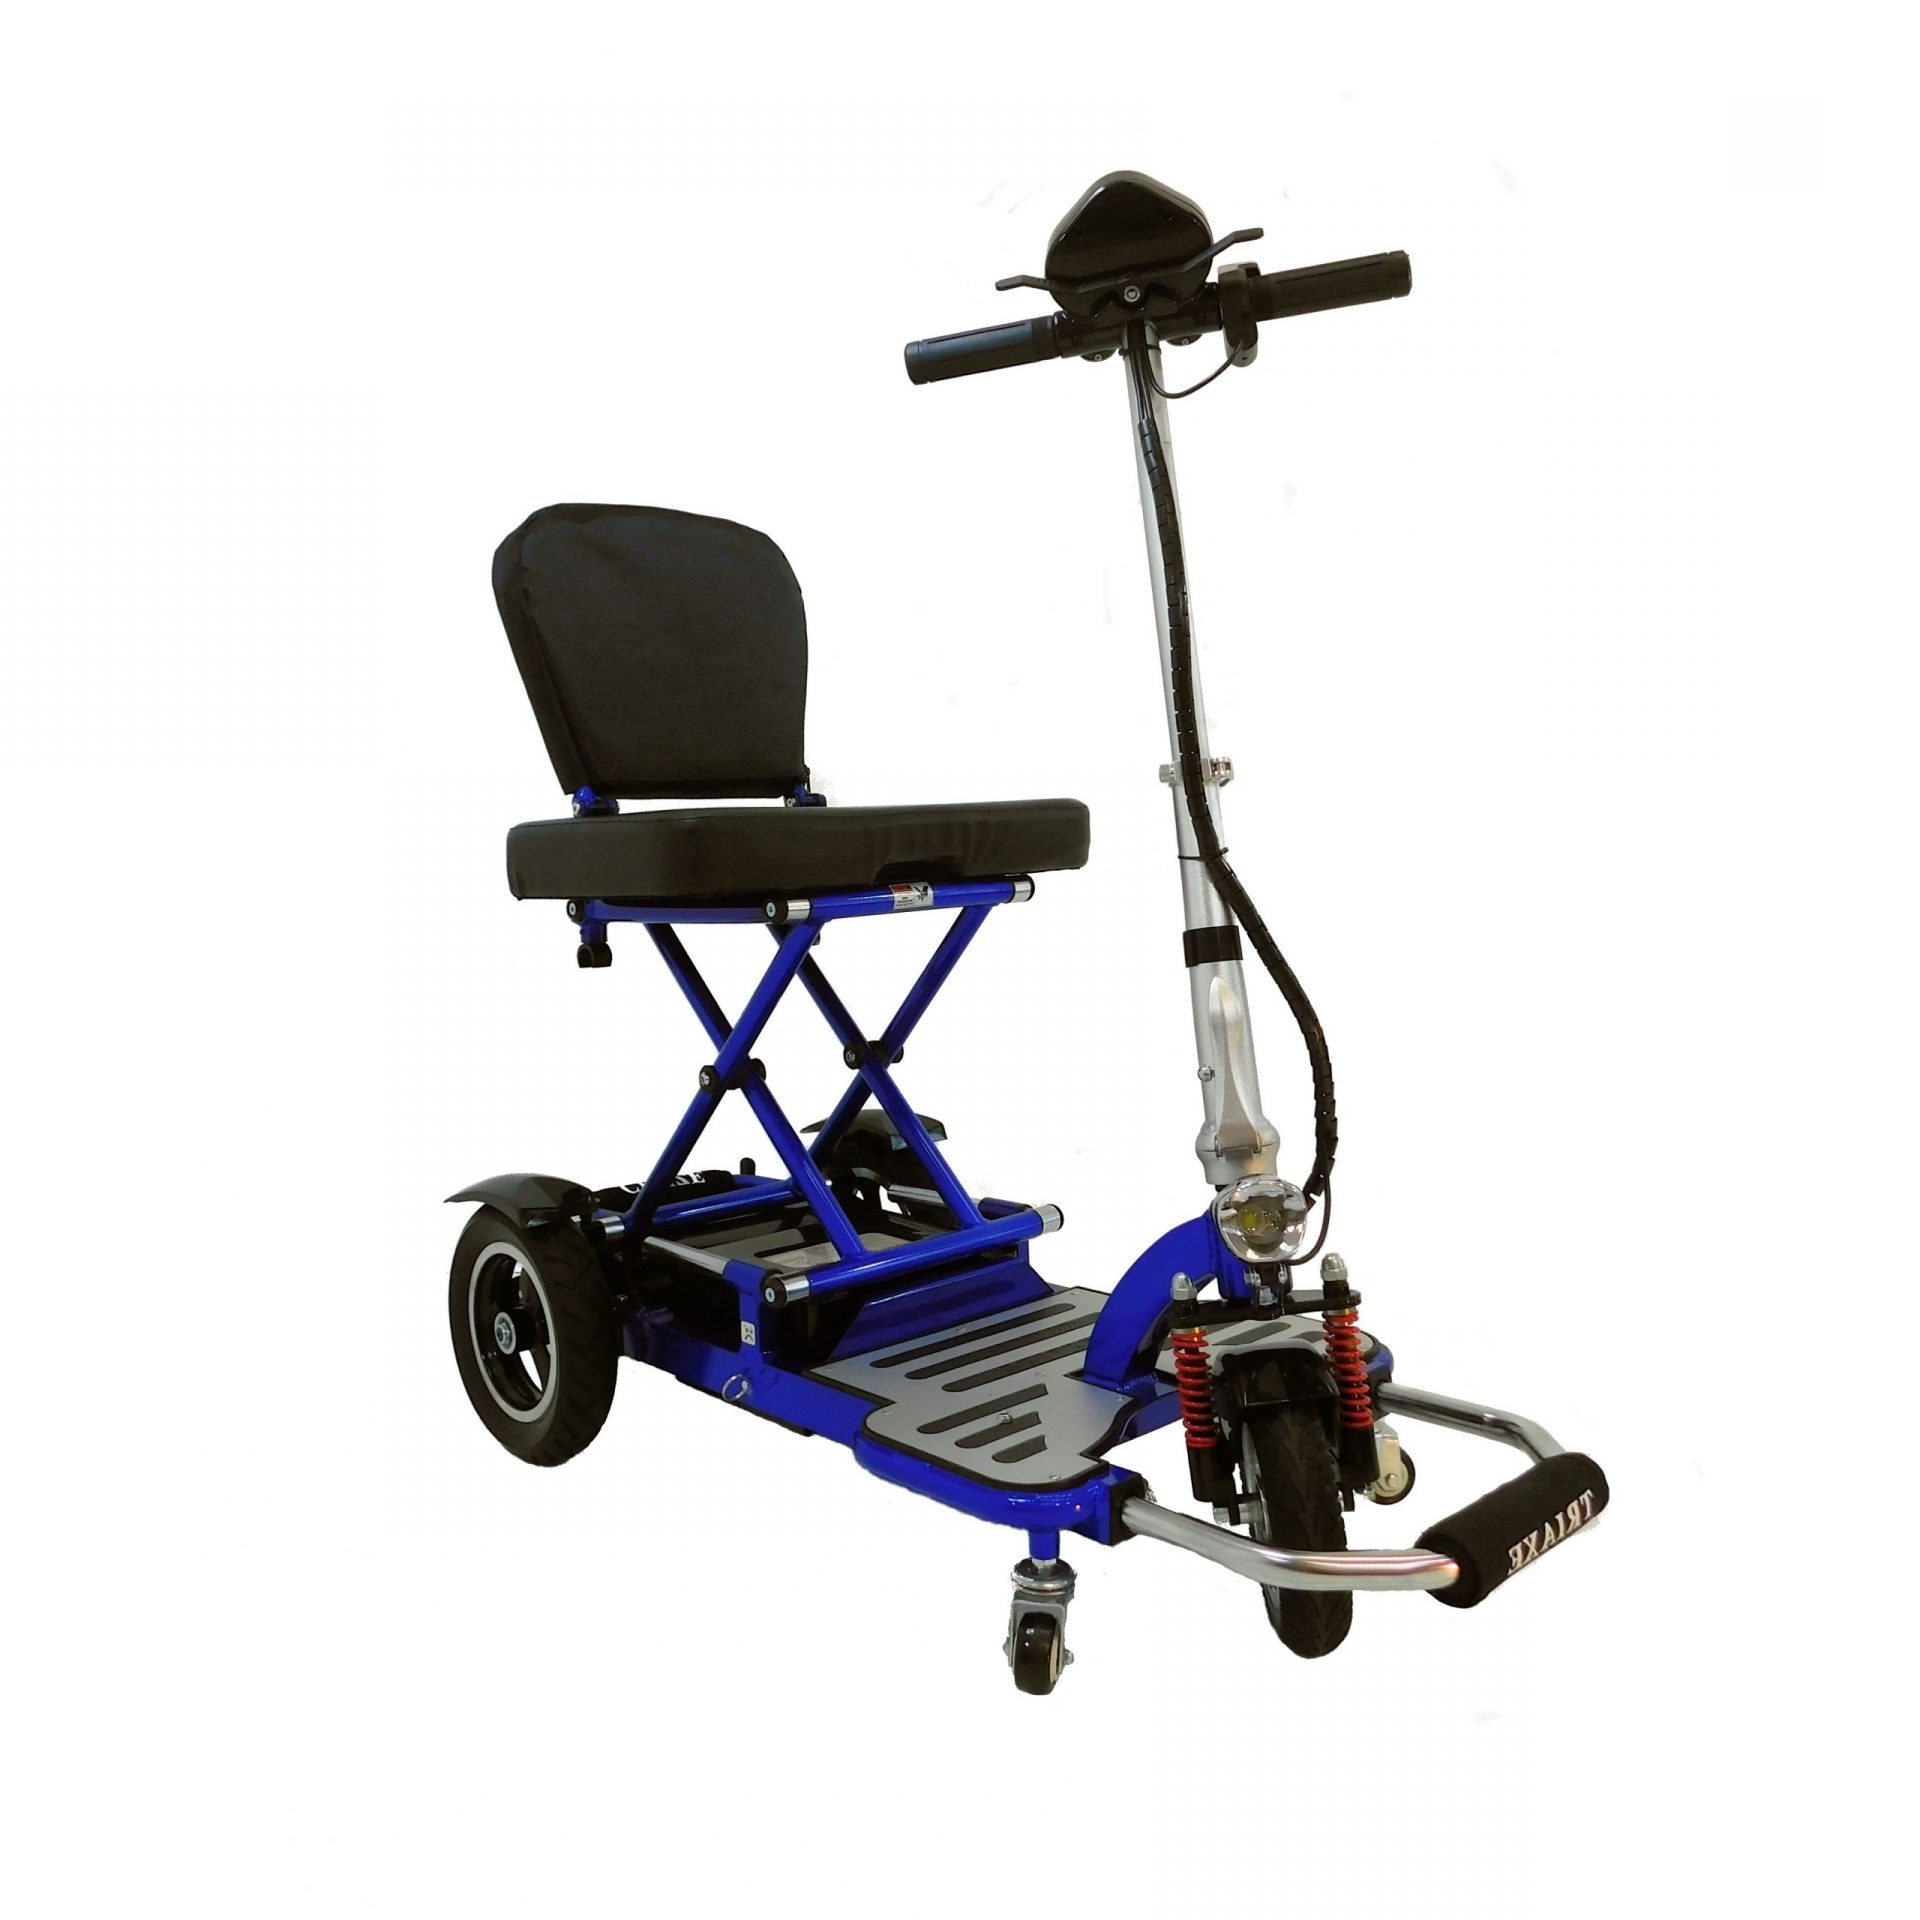 Reflex Blue Color of Enhance Mobility Triaxe Cruze Folding Mobility Scooter